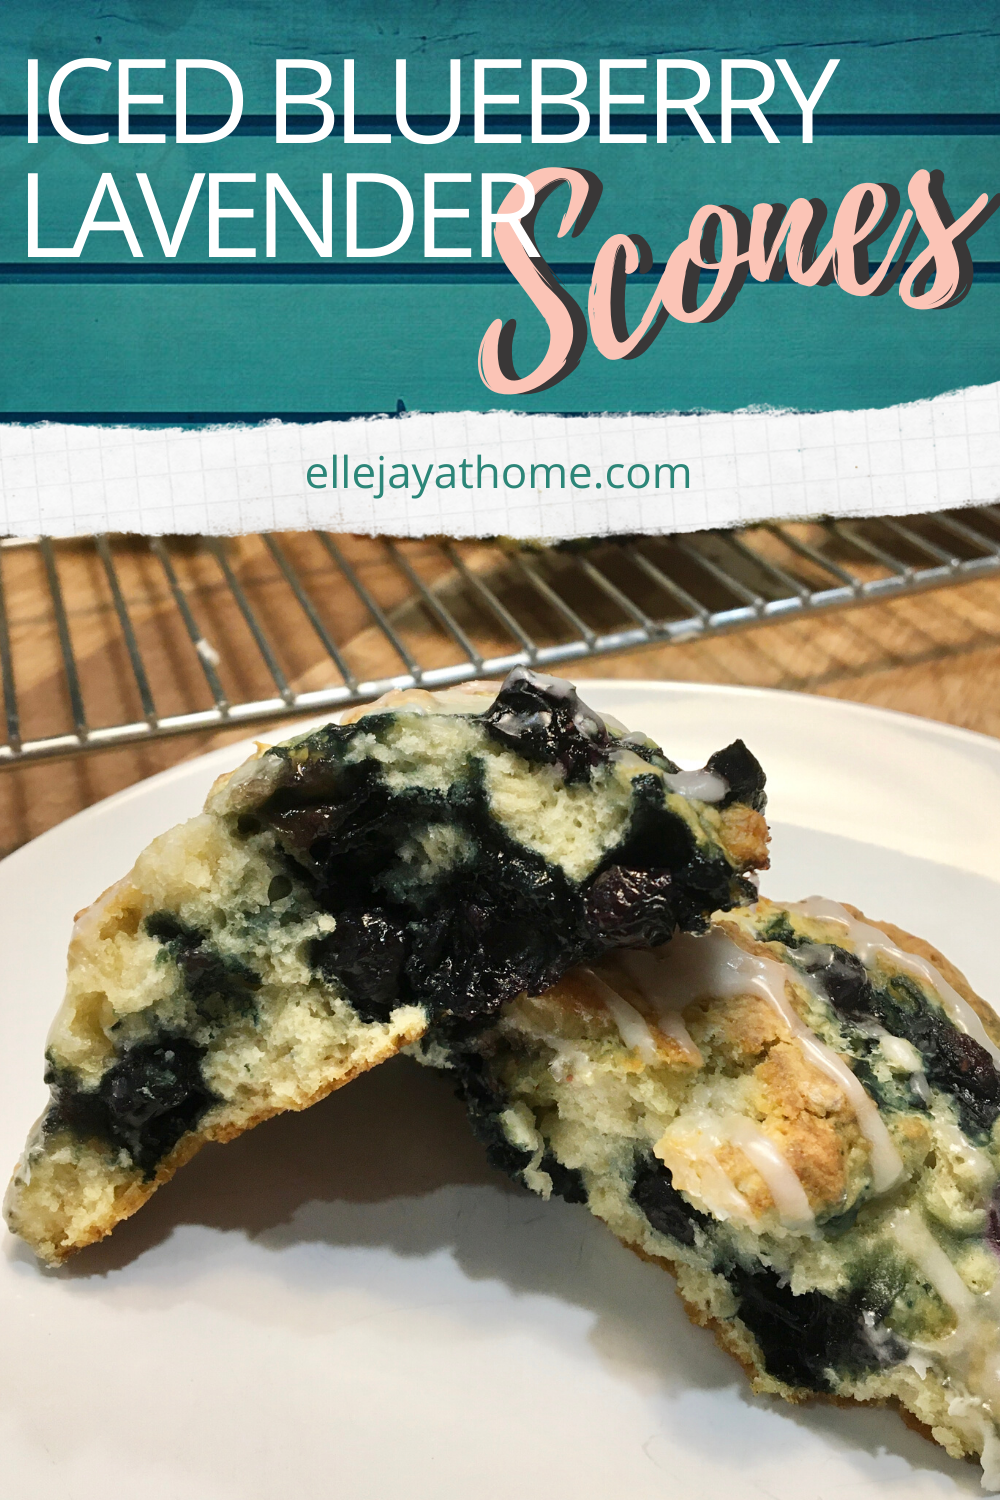 A gorgeous cross-section of our blueberry-studded Iced Blueberry Lavender Scones. Look at that drizzle!